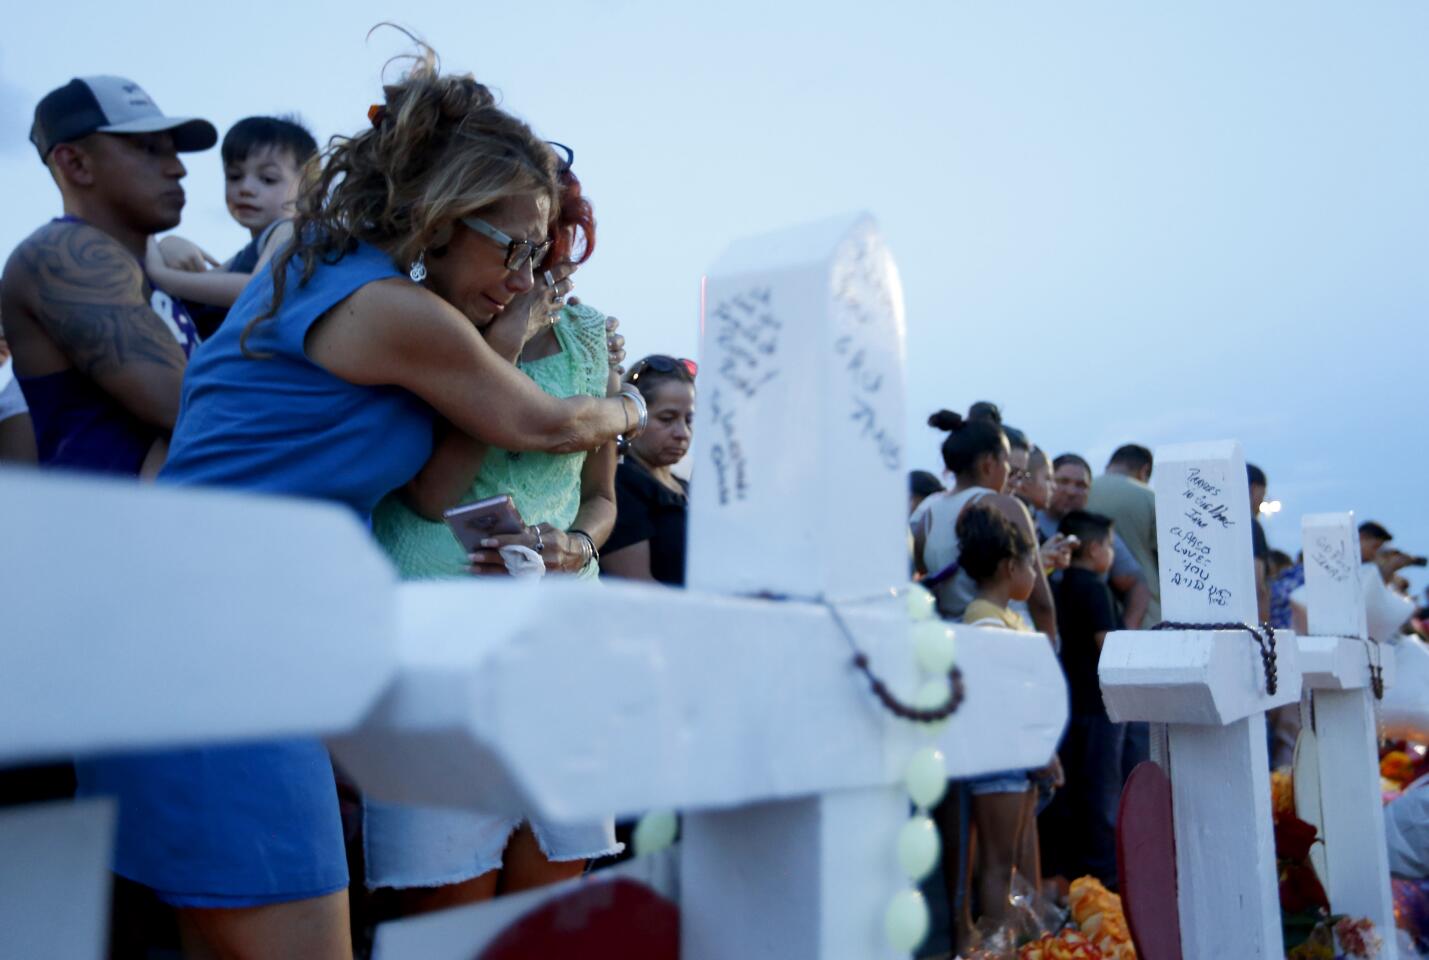 Rebecca Najera, left, hugs Elsa Escobar as they joined others gathered Monday, Aug. 5, 2019 in front of crosses representing the victims who died in the shooting at a Walmart in El Paso, Texas. (Vernon Bryant/The Dallas Morning News/TNS) ** OUTS - ELSENT, FPG, TCN - OUTS **